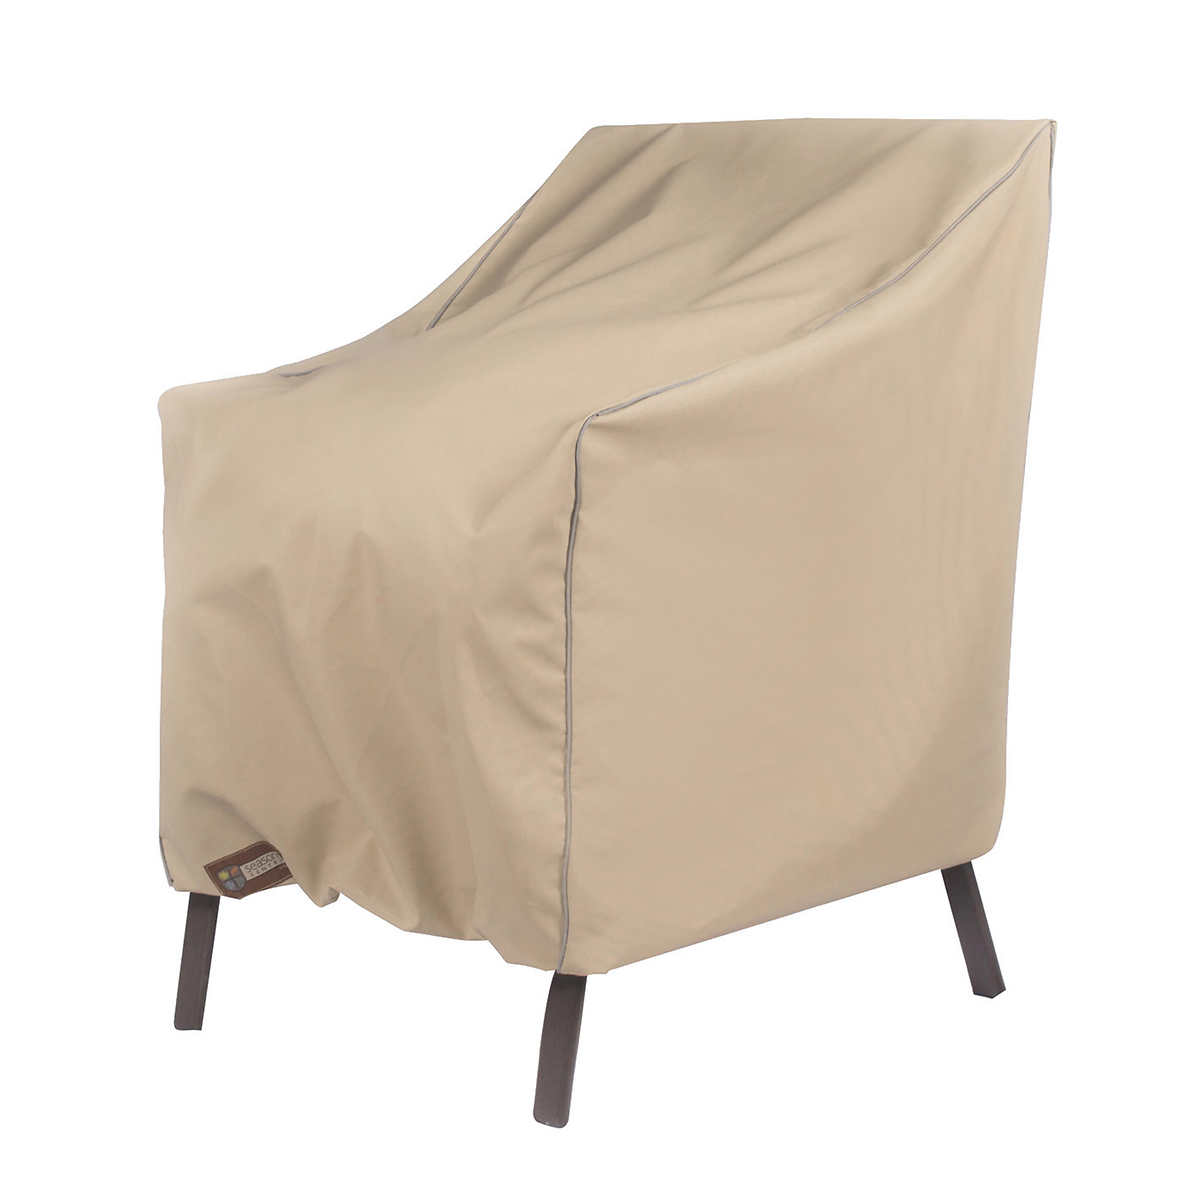 Best Outdoor Patio Furniture Covers Canada